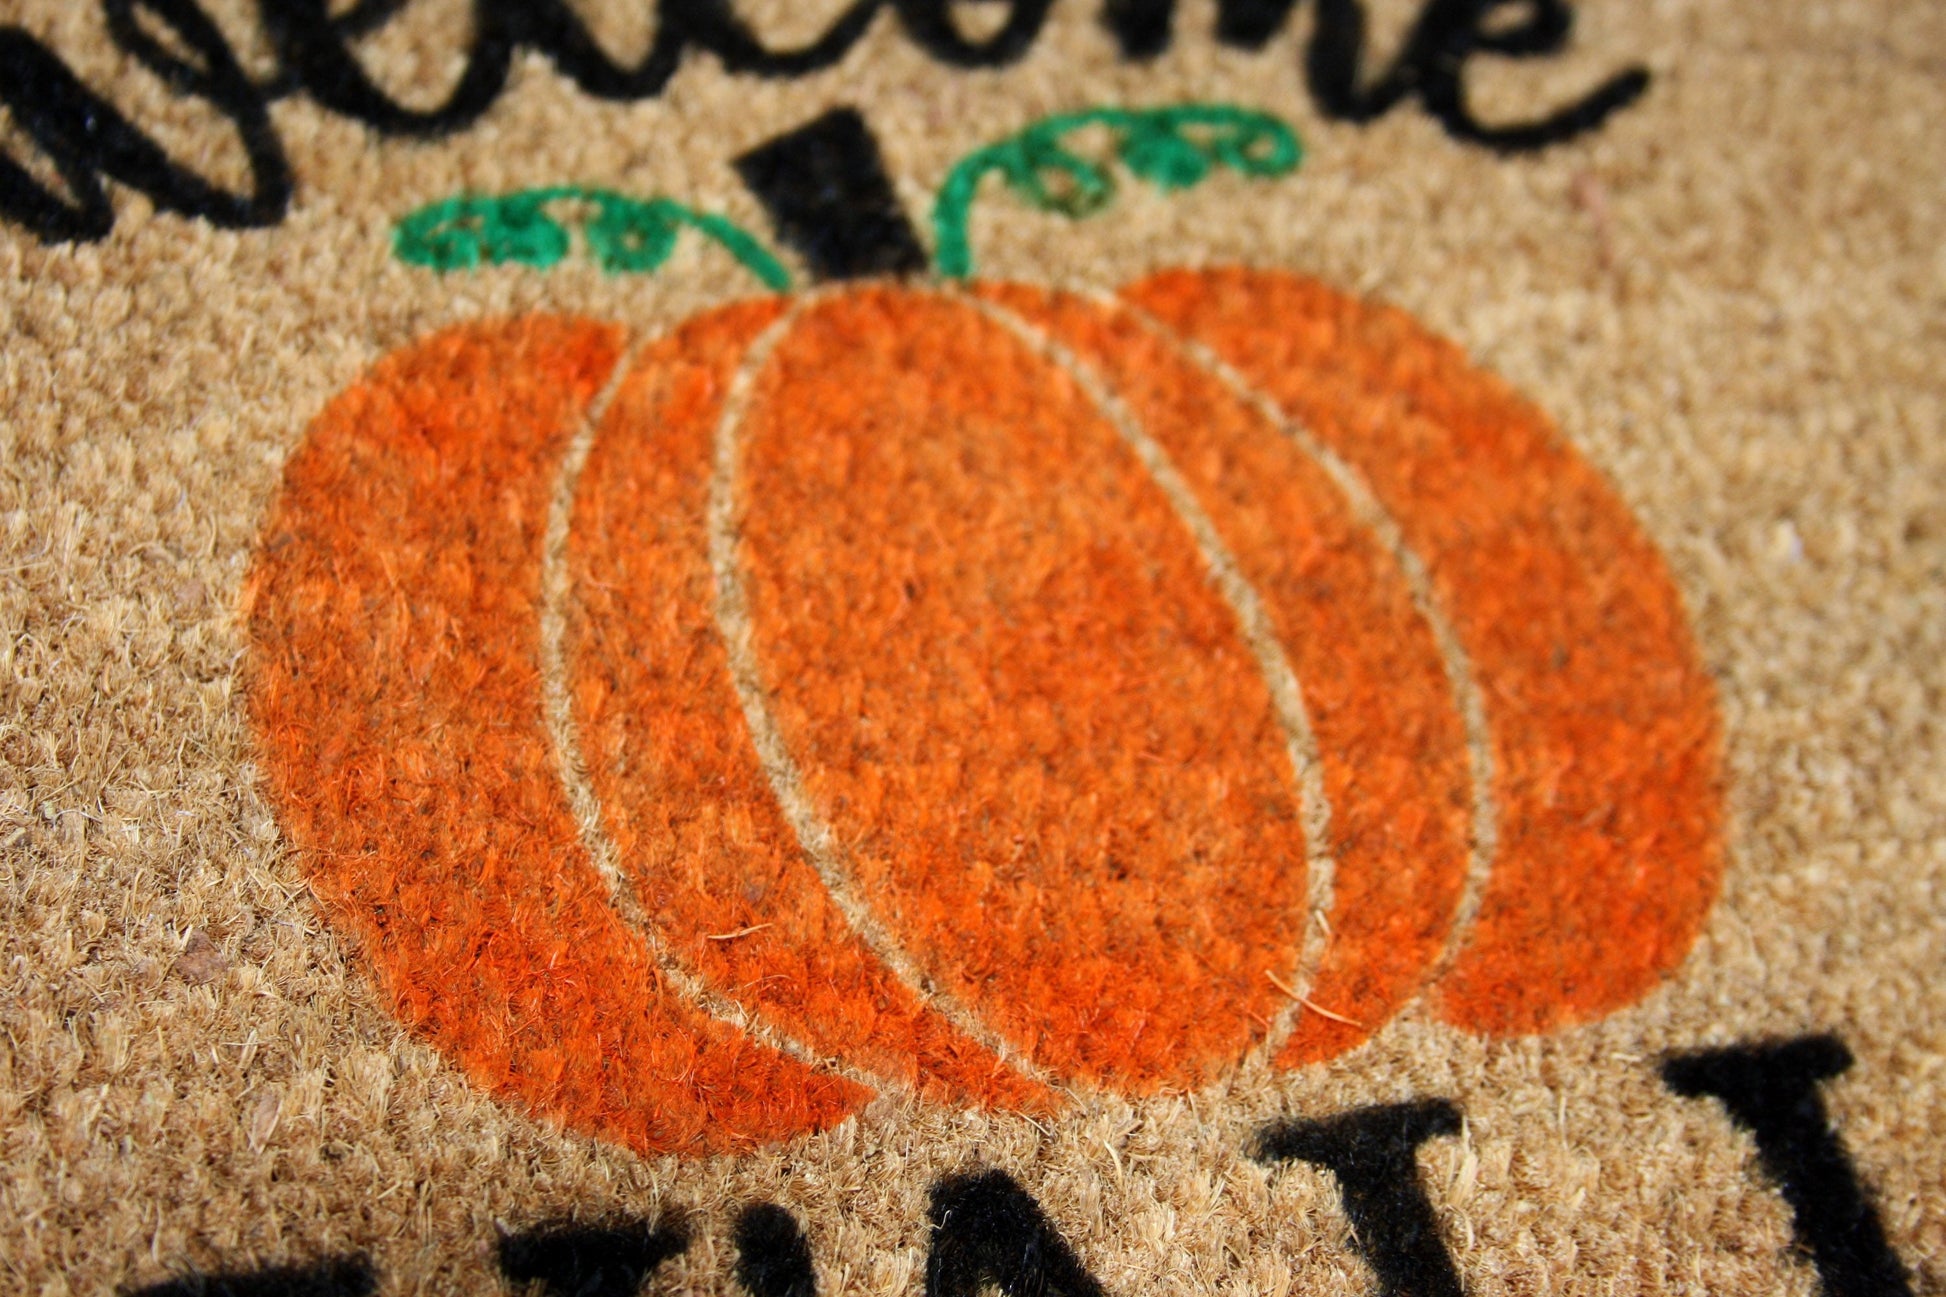 Juvale Thanksgiving Welcome Mat for Front Door, Outdoor Fall Rug for Porch, Give Thanks, 30x17 in